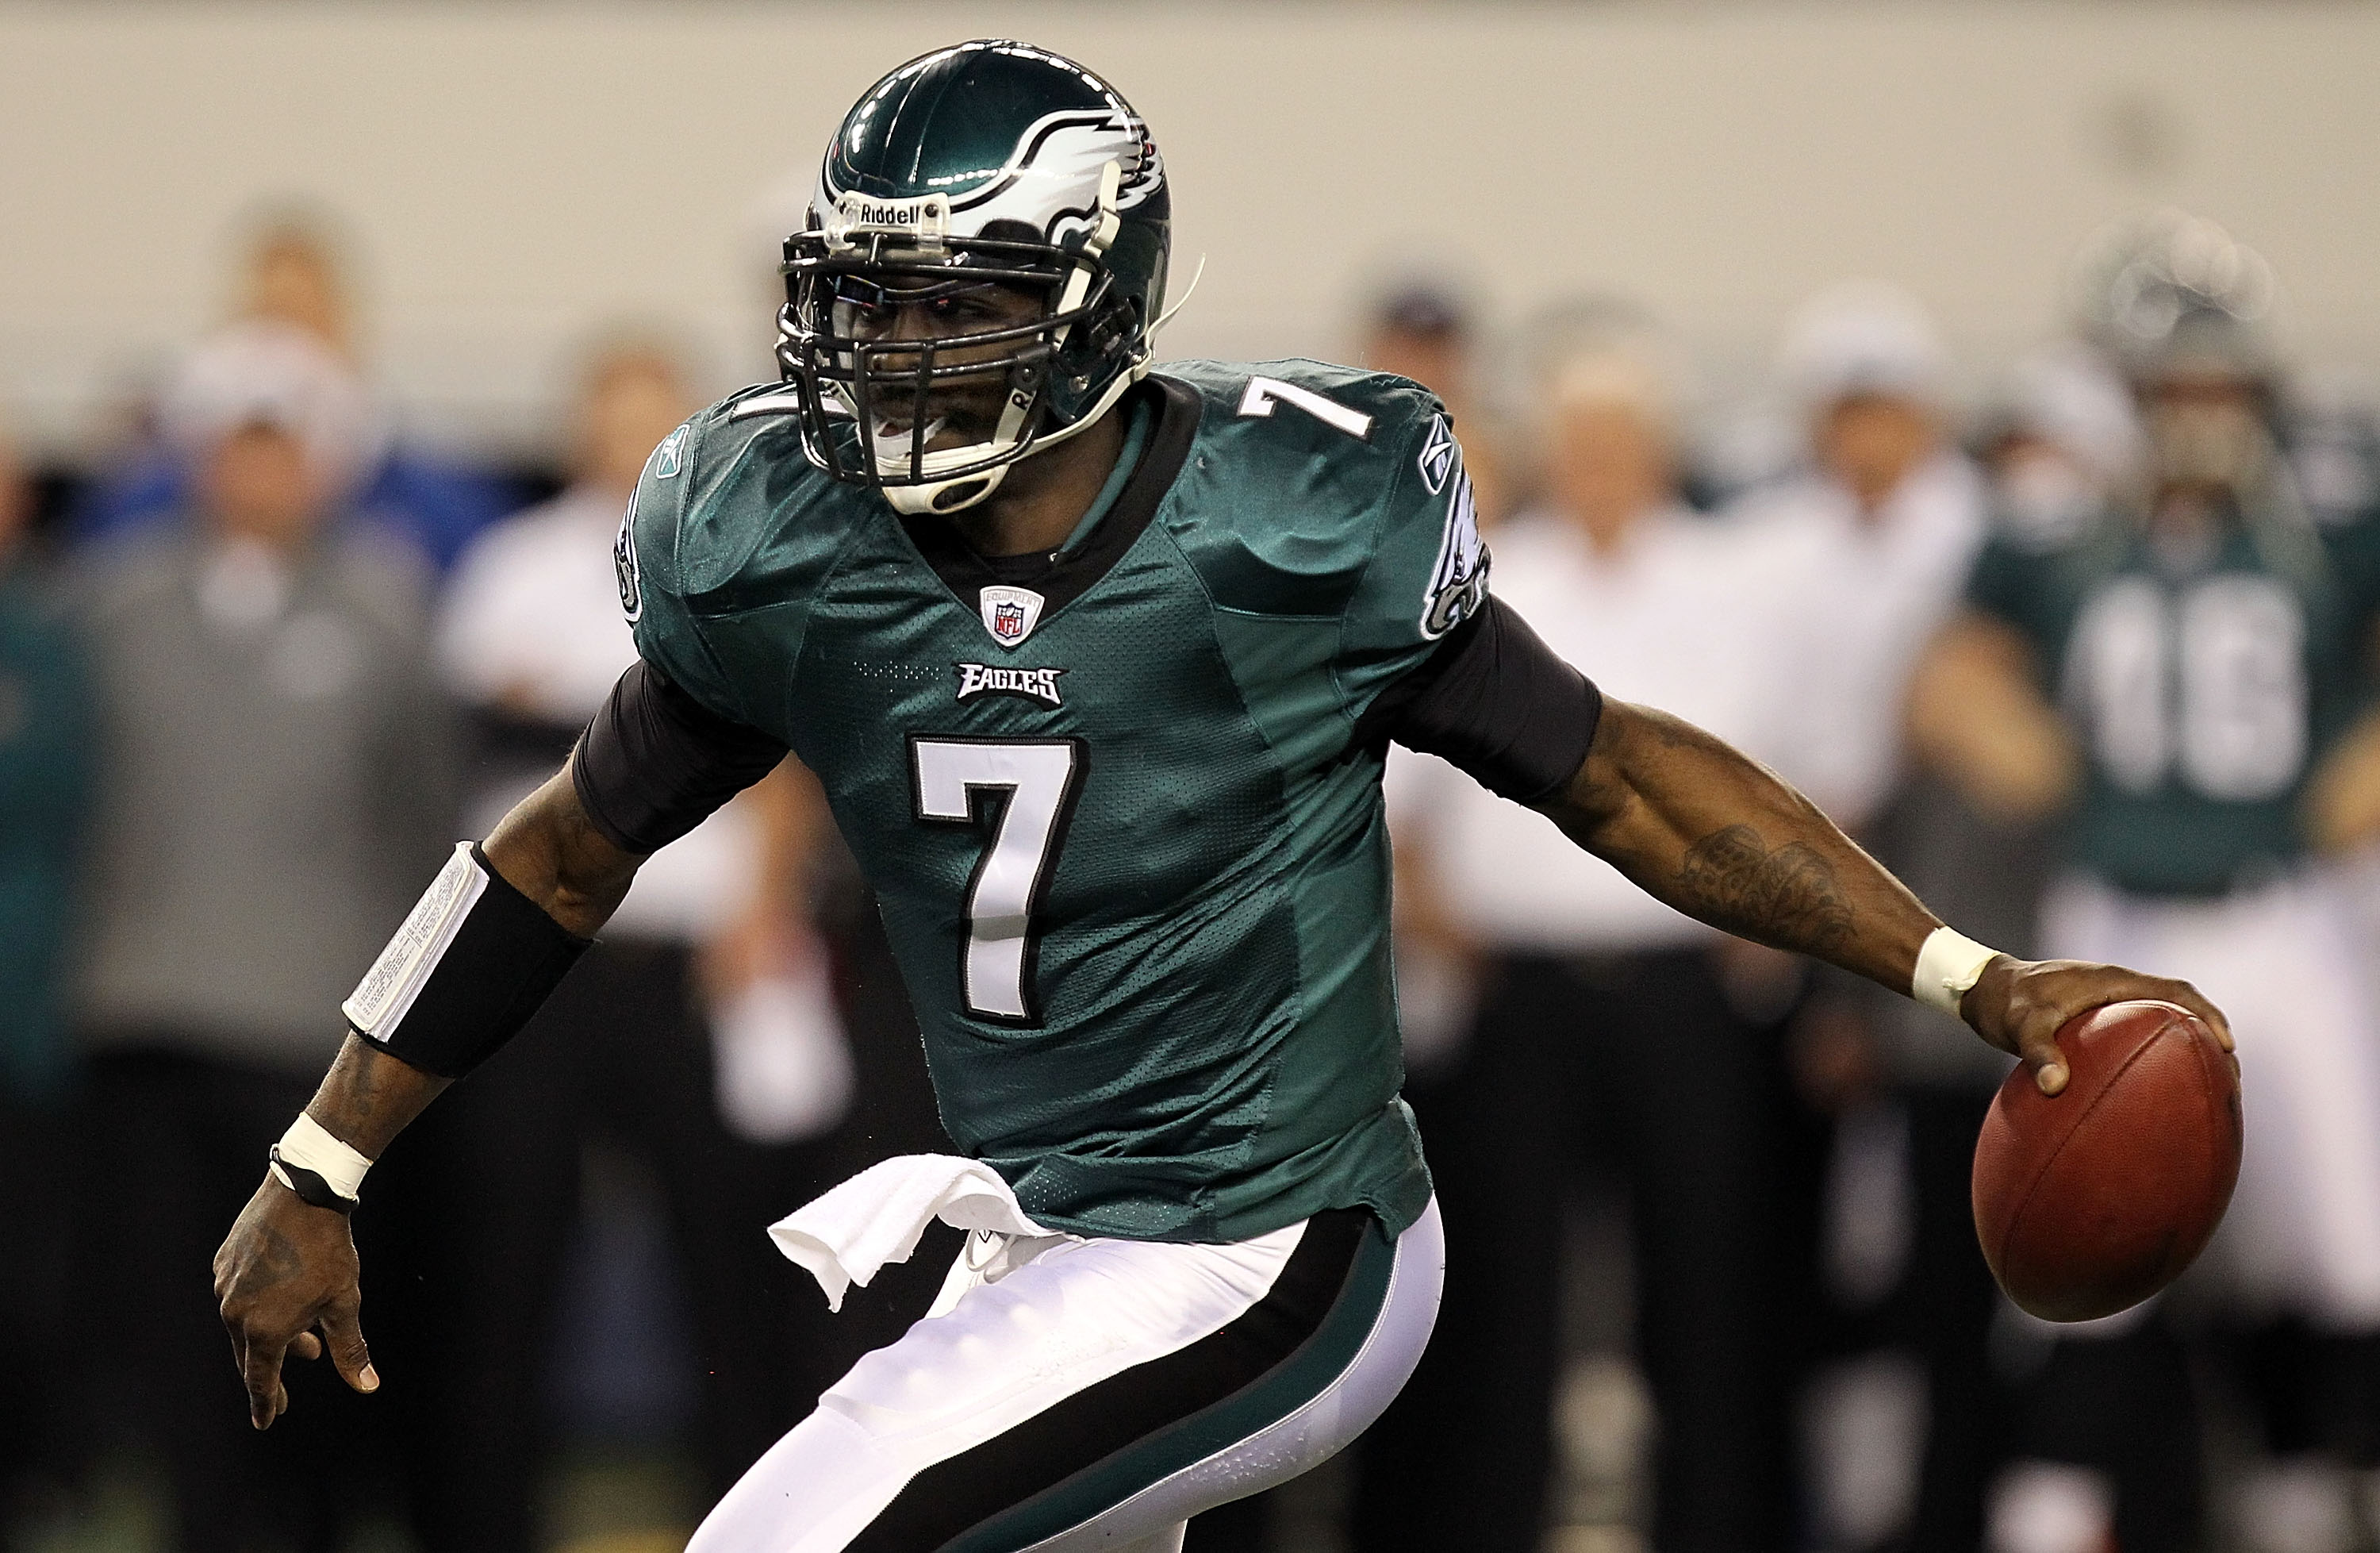 With Michael Vick likely retiring with Falcons, share your